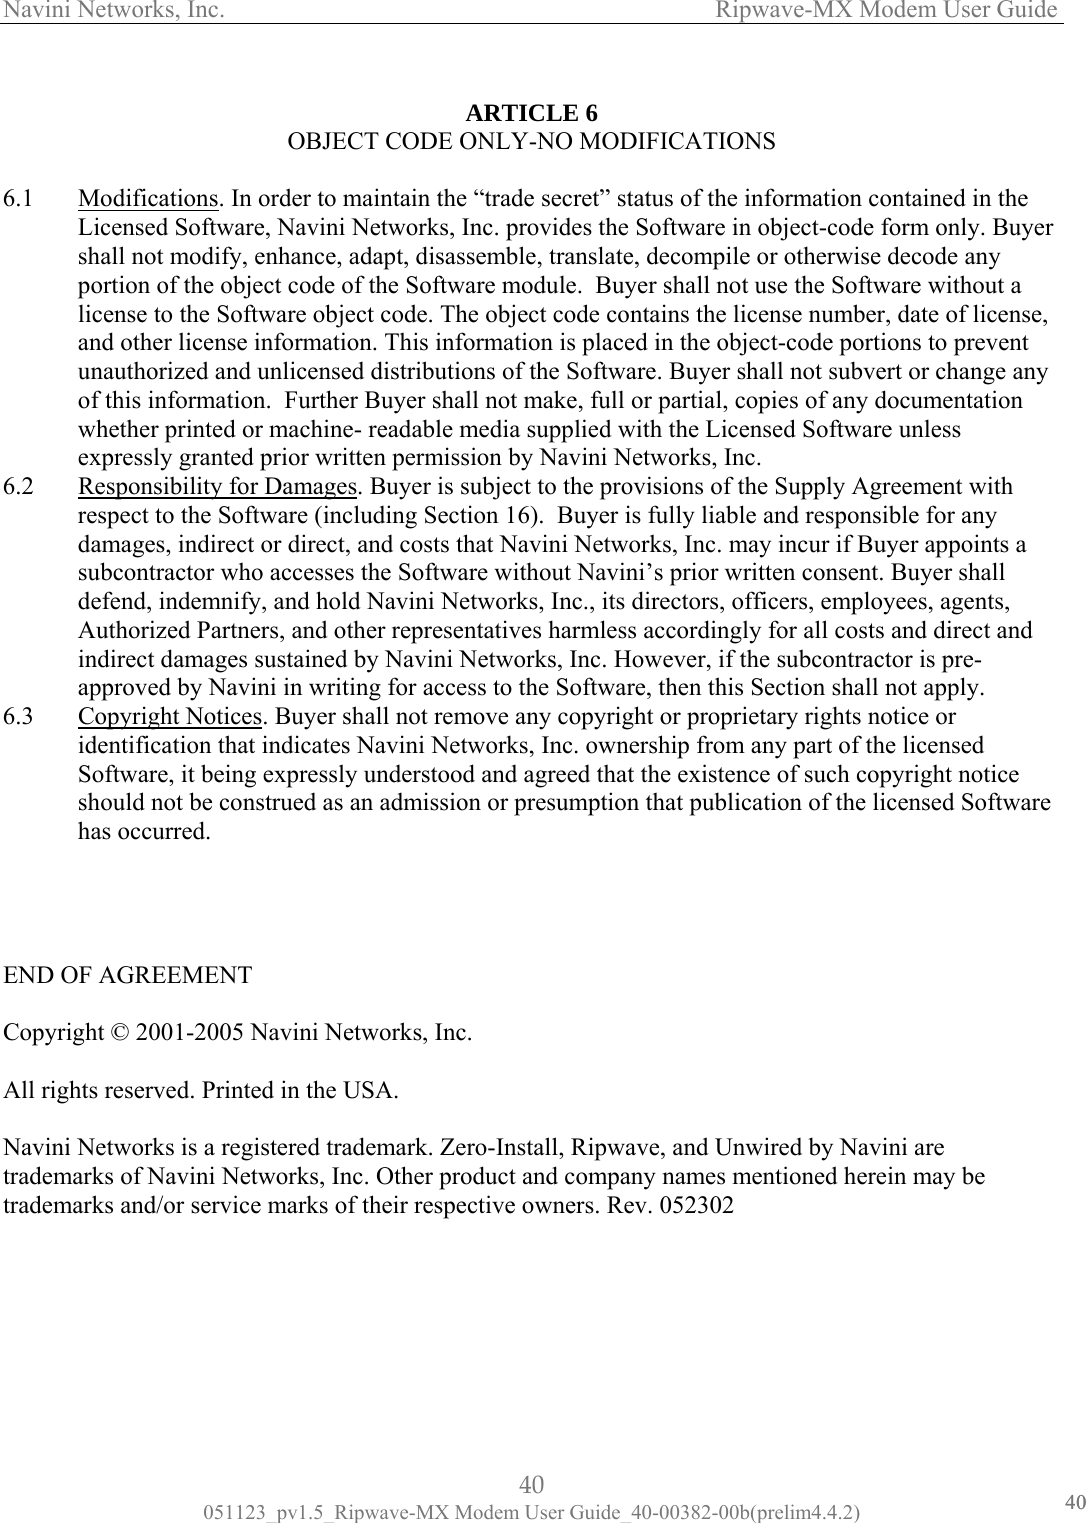 Navini Networks, Inc.                   Ripwave-MX Modem User Guide  ARTICLE 6 OBJECT CODE ONLY-NO MODIFICATIONS   cations6.1  Modifi . In order to maintain the “trade secret” status of the information contained in the  shall noportionand other license information. This information is placed in the object-code portions to prevent unauthorized and unlicensed distributions of the Software. Buyer shall not subvert or change any unless 6.2 Licensed Software, Navini Networks, Inc. provides the Software in object-code form only. Buyert modify, enhance, adapt, disassemble, translate, decompile or otherwise decode any  of the object code of the Software module.  Buyer shall not use the Software without a license to the Software object code. The object code contains the license number, date of license, of this information.  Further Buyer shall not make, full or partial, copies of any documentation whether printed or machine- readable media supplied with the Licensed Software expressly granted prior written permission by Navini Networks, Inc. Responsibility for Damages. Buyer is subject to the provisions of the Supply Agreement with respect to the Software (including Section 16).  Buyer is fully liable and responsible for any damages, indirect or direct, and costs that Navini Networks, Inc. may incur if Buyer apposubcontractor who accesses the Software without Navini’s prior written consent. Buyer shall defend, indemnify, and hold Navini Netwints a orks, Inc., its directors, officers, employees, agents, Authorized Partners, and other representatives harmless accordingly for all costs and direct and indirect damages sustained by Navini Networks, Inc. However, if the subcontractor is pre-approved by Navini in writing for access to the Software, then this Section shall not apply. 6.3  Copyright Notices. Buyer shall not remove any copyright or proprietary rights notice or identification that indicates Navini Networks, Inc. ownership from any part of the licensed  ware     Copyri All righ Navinitrademtradem spective owners. Rev. 052302       Software, it being expressly understood and agreed that the existence of such copyright noticeshould not be construed as an admission or presumption that publication of the licensed Softhas occurred.   END OF AGREEMENT ght © 2001-2005 Navini Networks, Inc. ts reserved. Printed in the USA.  Networks is a registered trademark. Zero-Install, Ripwave, and Unwired by Navini are arks of Navini Networks, Inc. Other product and company names mentioned herein may be arks and/or service marks of their re40 051123_pv1.5_Ripwave-MX Modem User Guide_40-00382-00b(prelim4.4.2) 4040